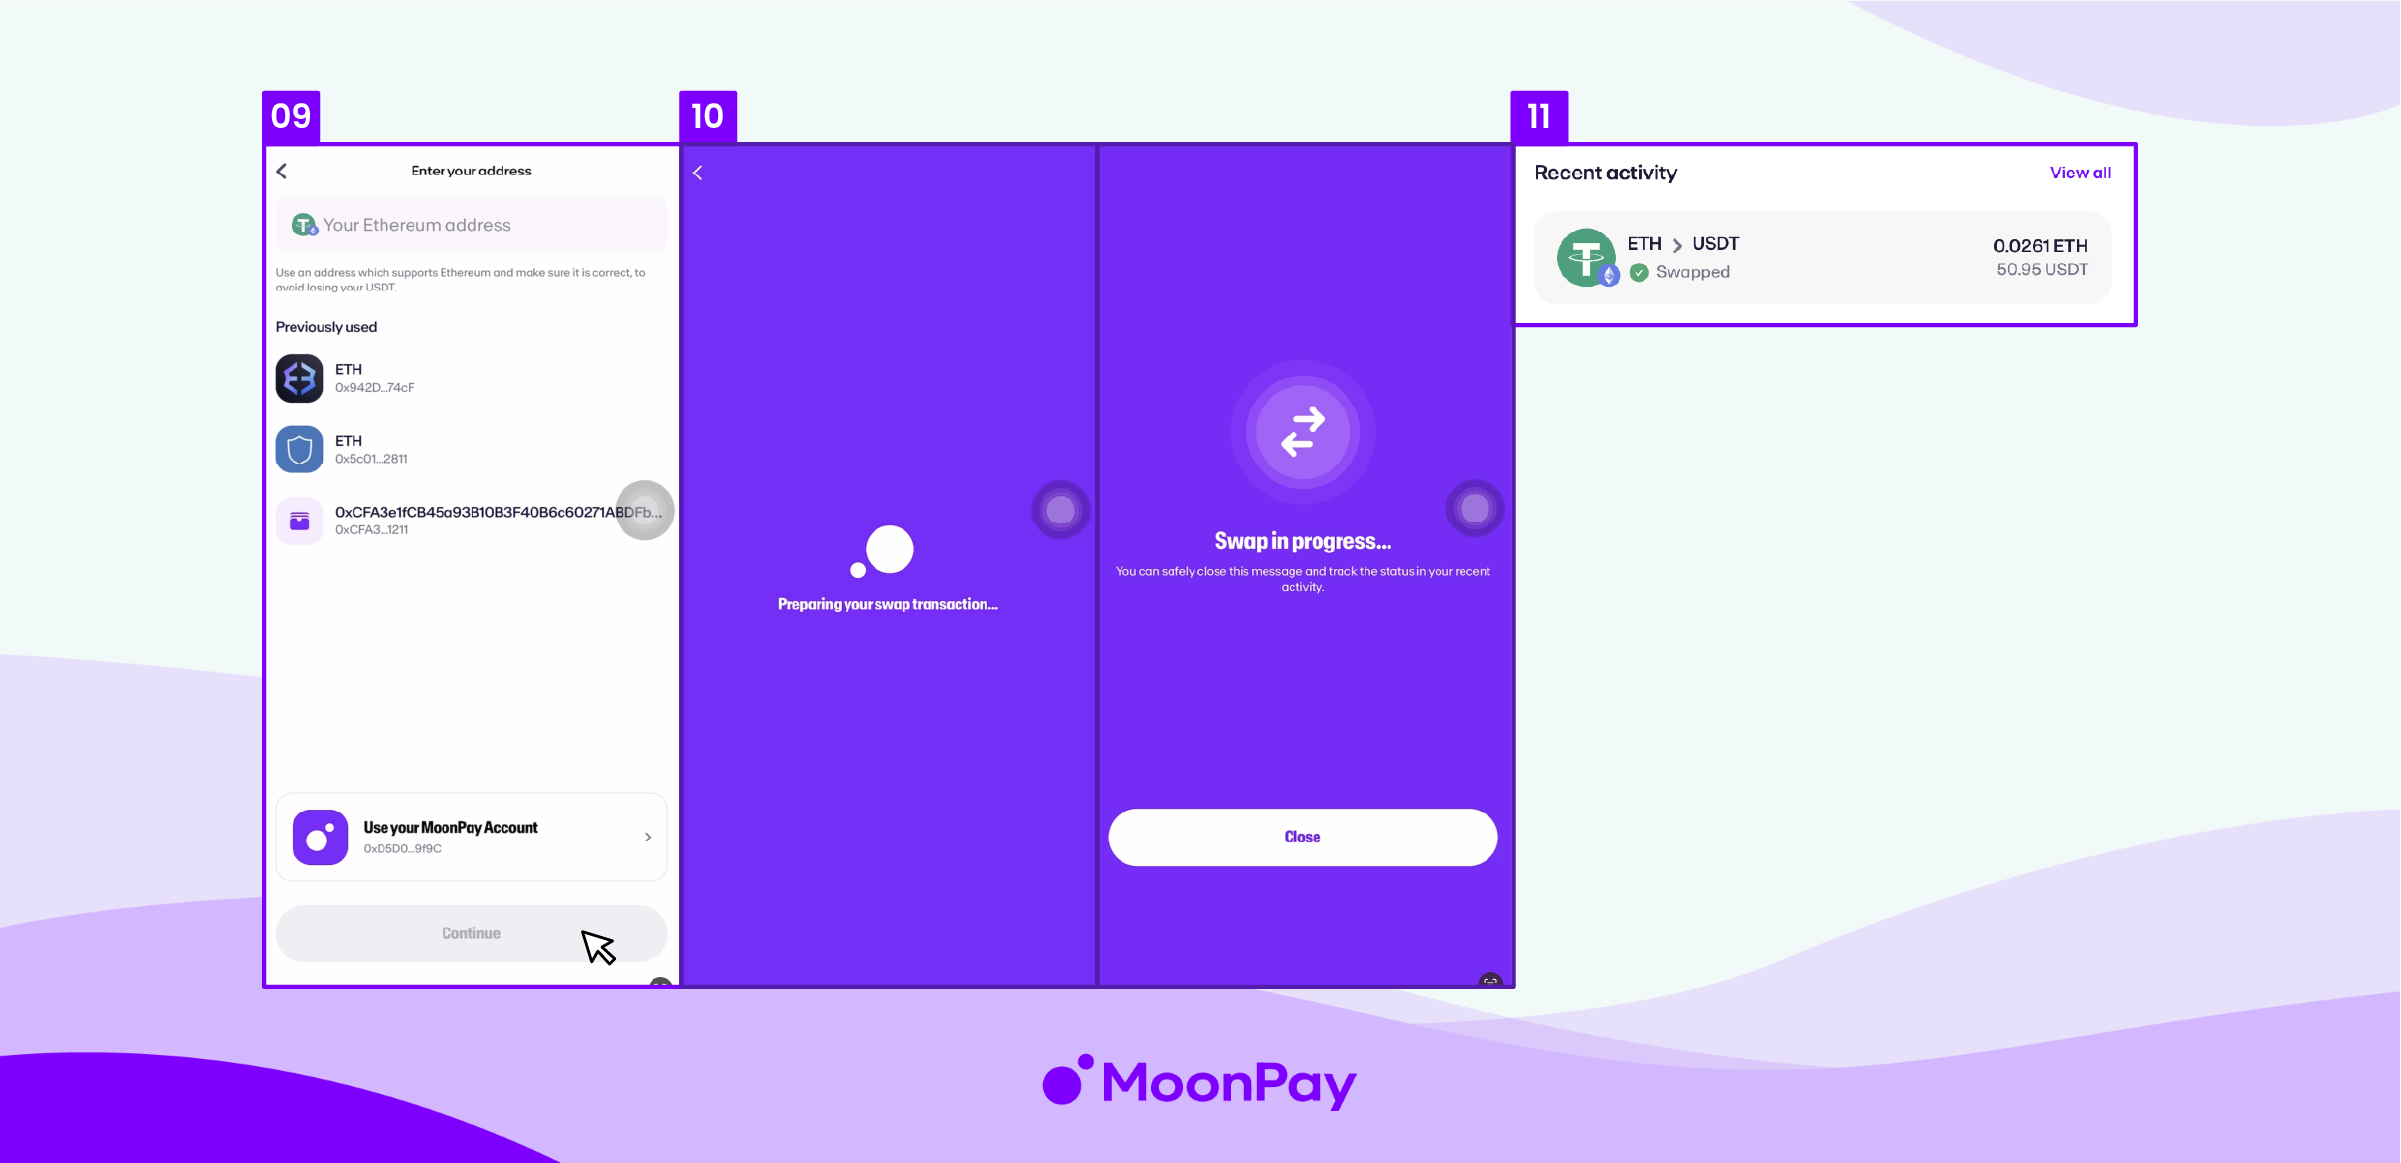 Steps 9-11 in the MoonPay app on how to swap.